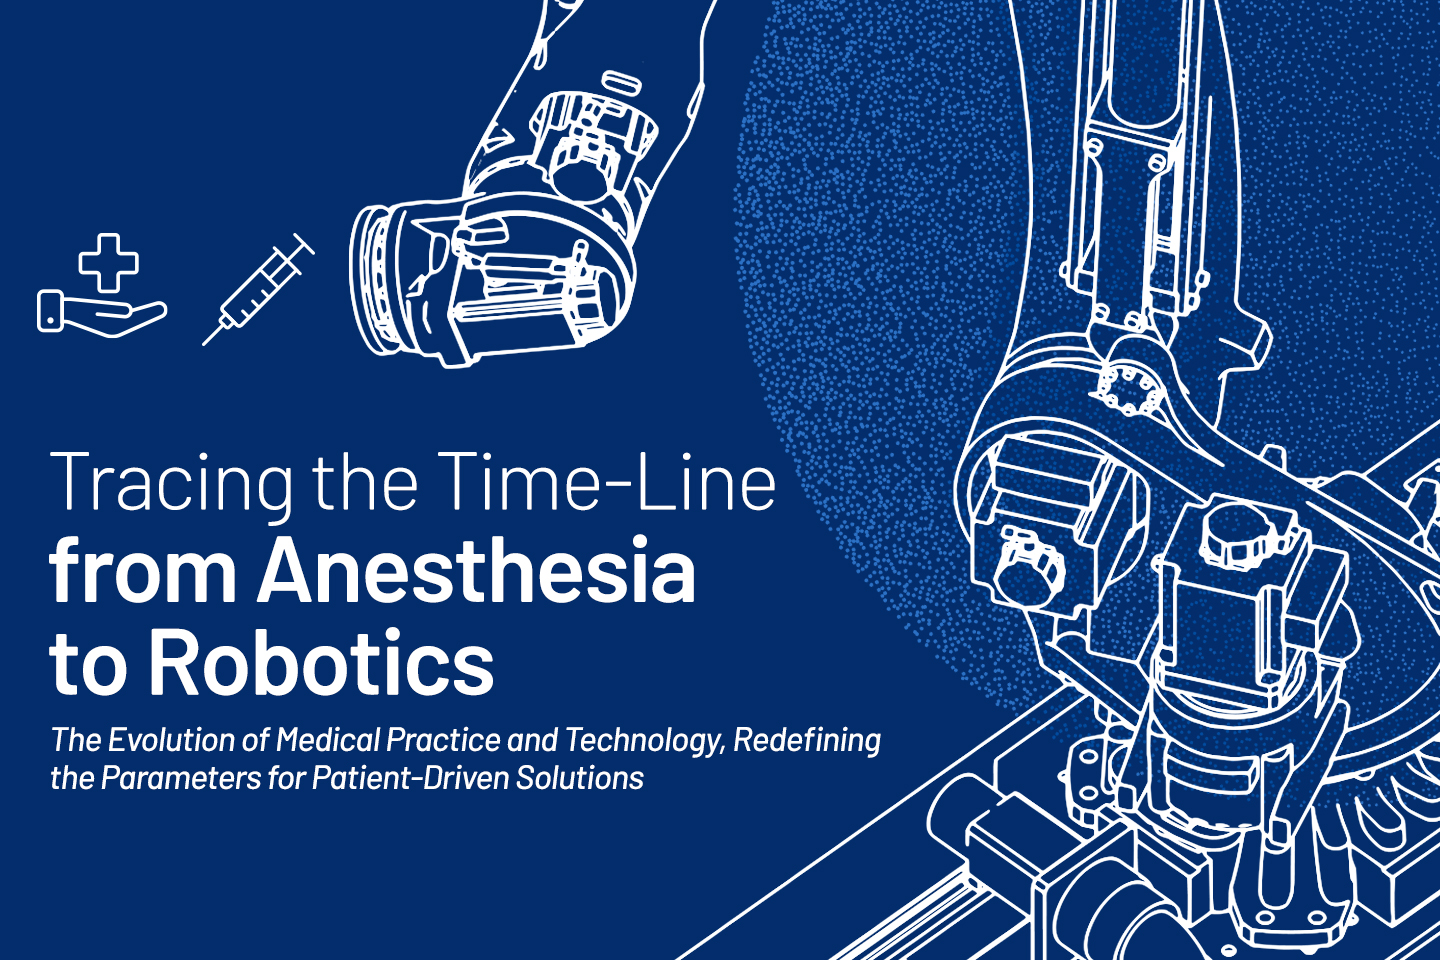 From Anesthesia to Robotics: How Medical Technology Has Evolved to Serve Patient needs